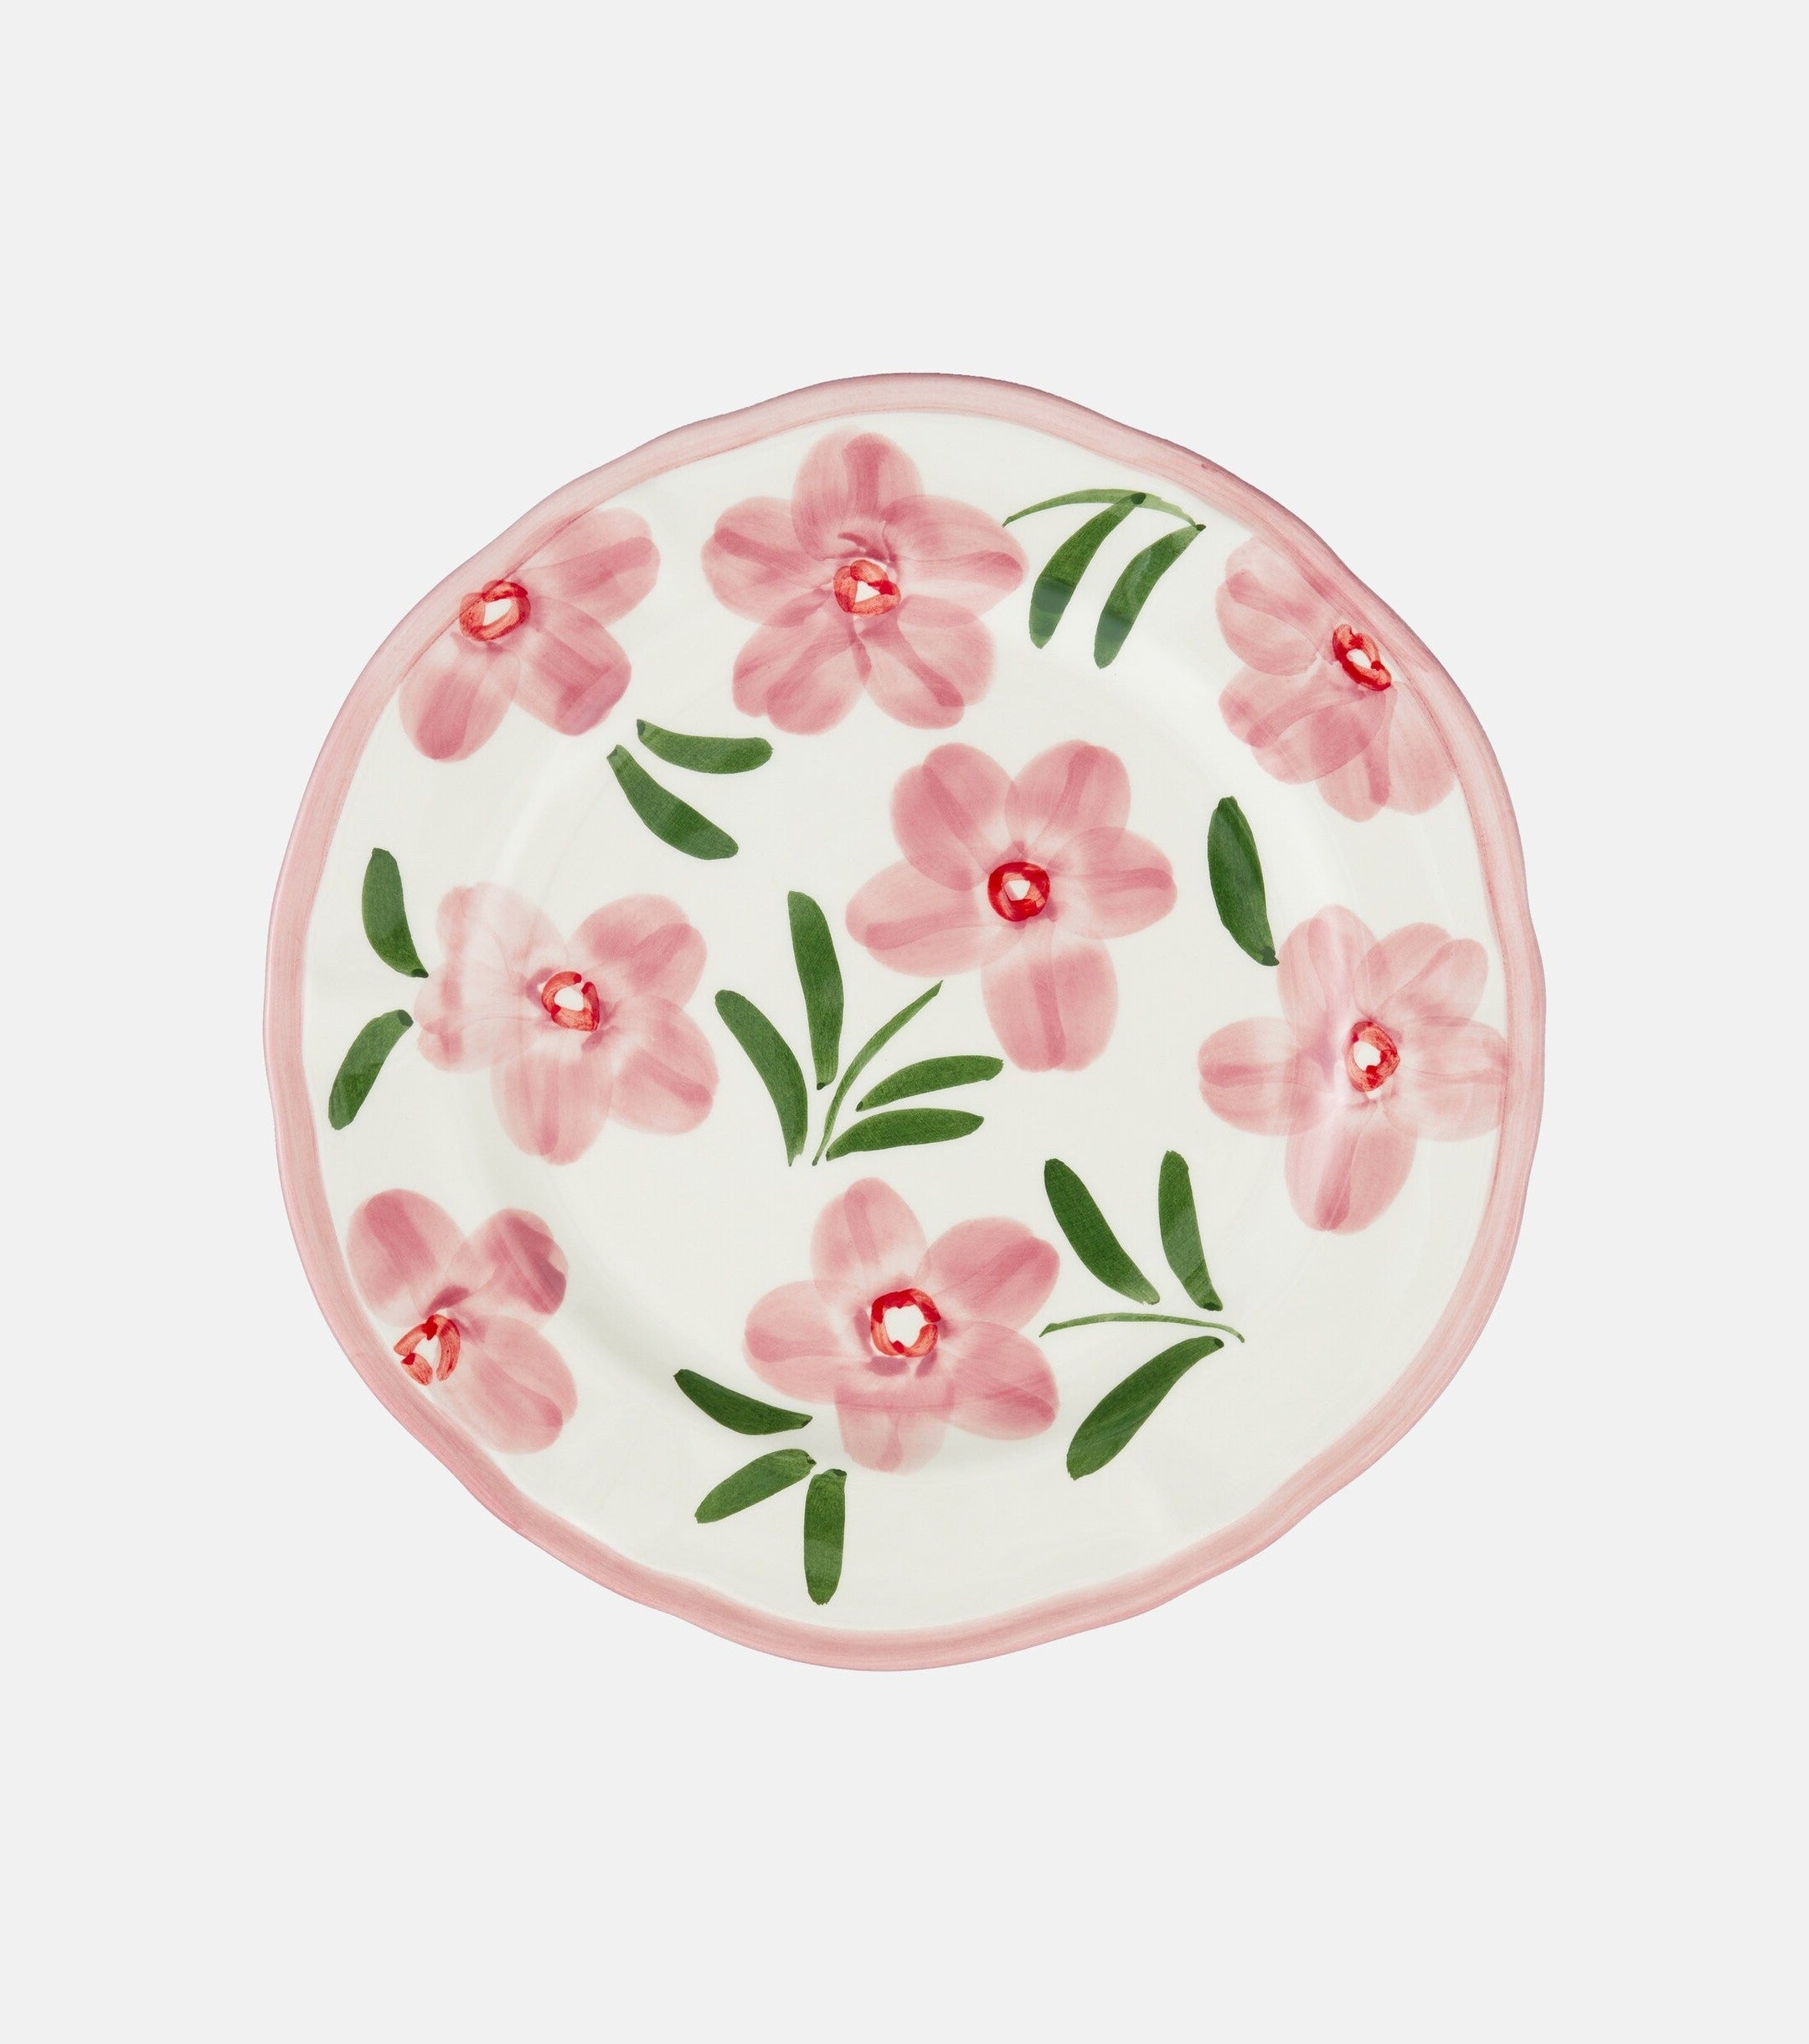 A ceramic round plate that is decorated with handpainted pink flowers and finished with a pink rim.